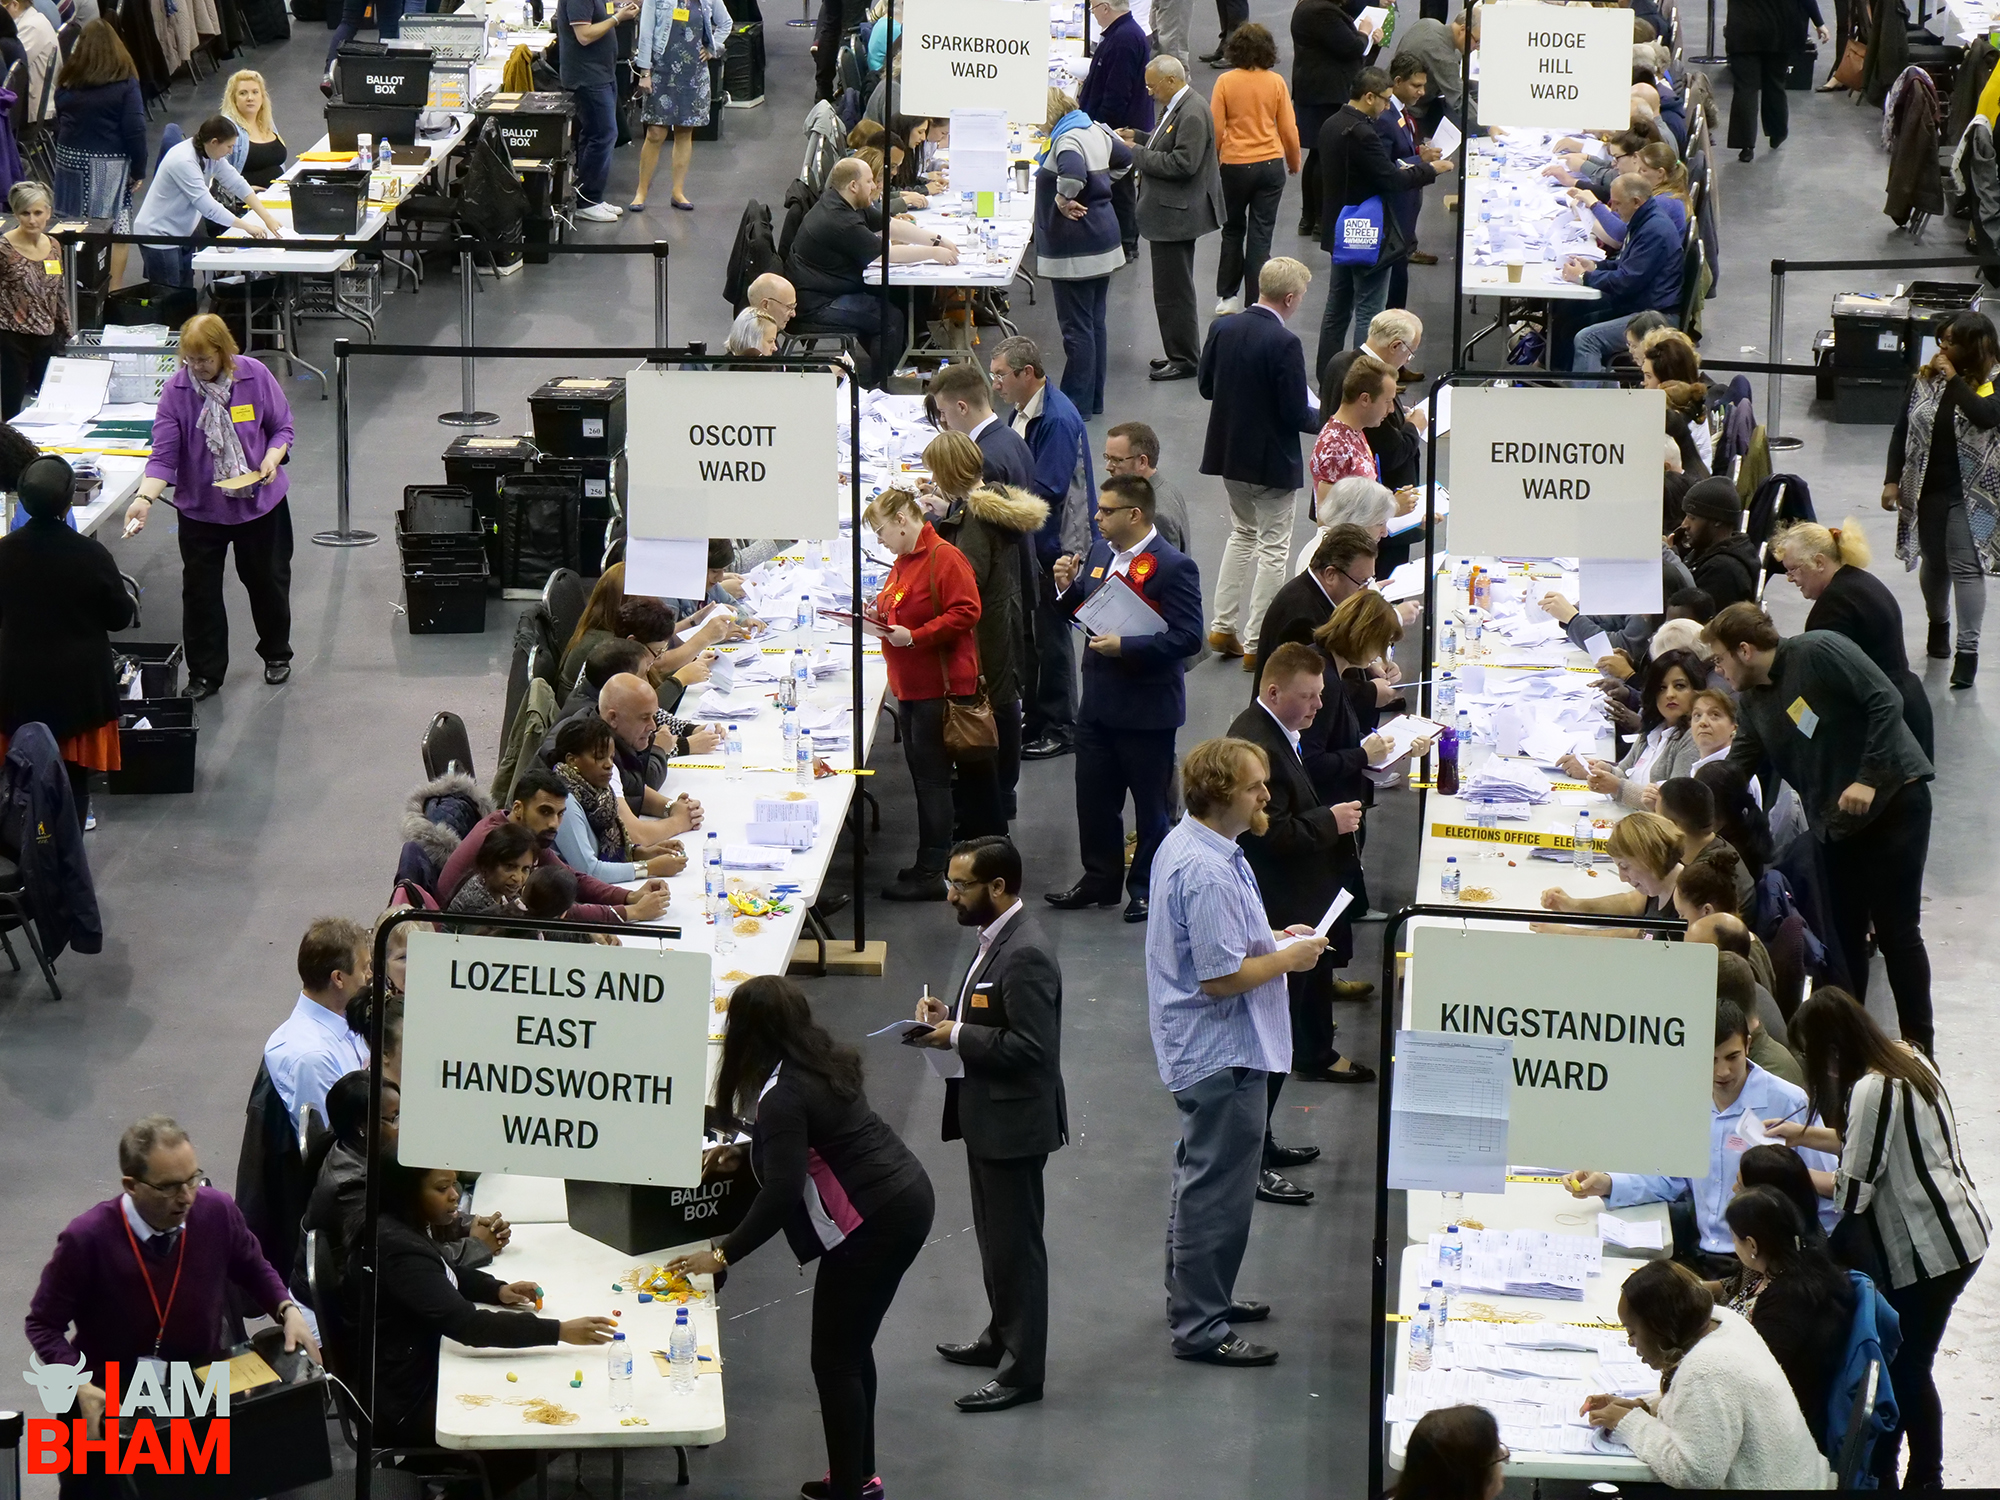 The West Midlands Mayoral Election vote count gets underway at the Barclaycard Arena in Birmingham